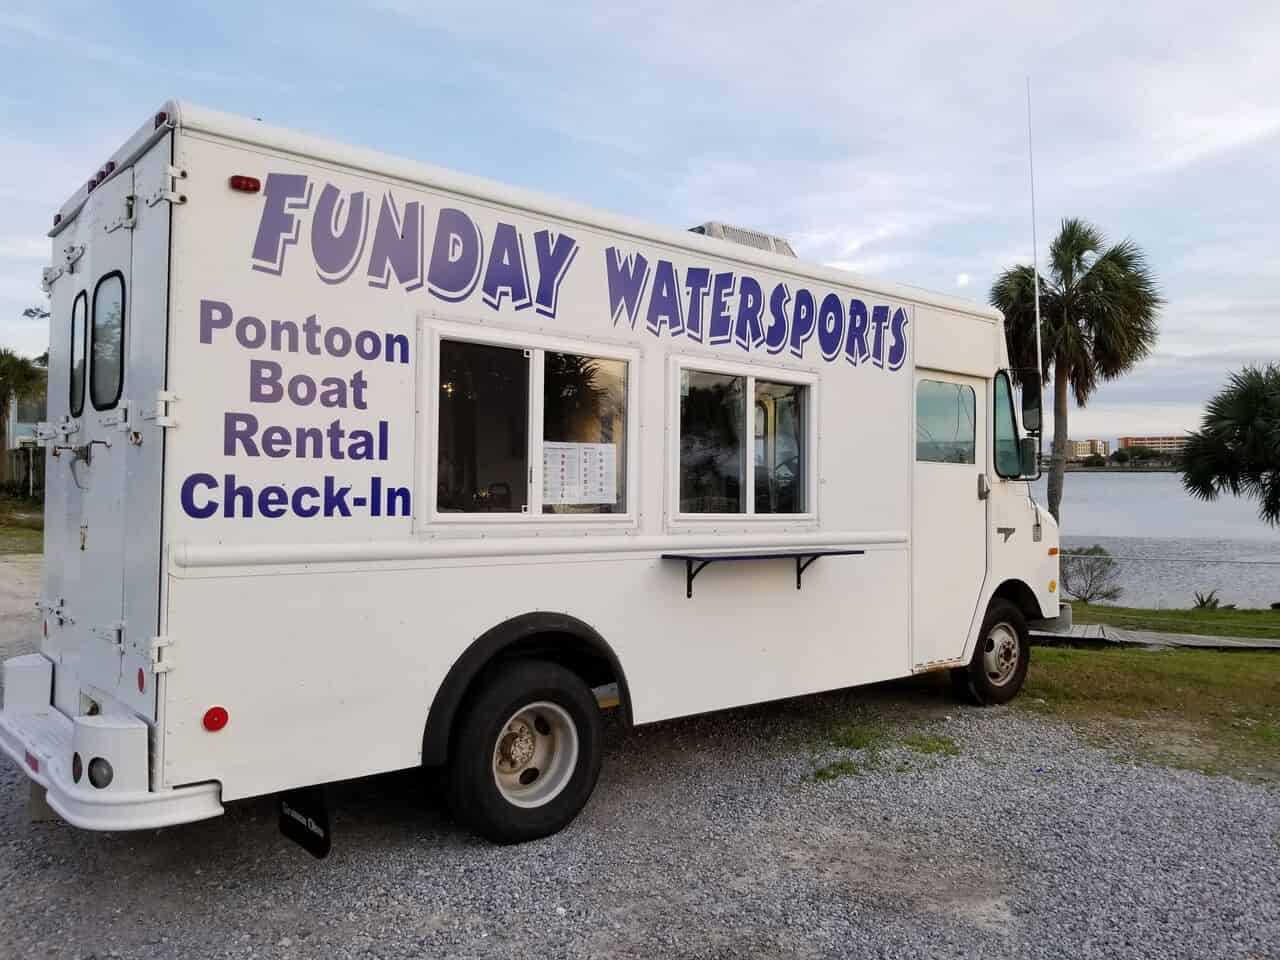 8-Hour-Pontoon-Boat-Rental-by-Funday-Watersports